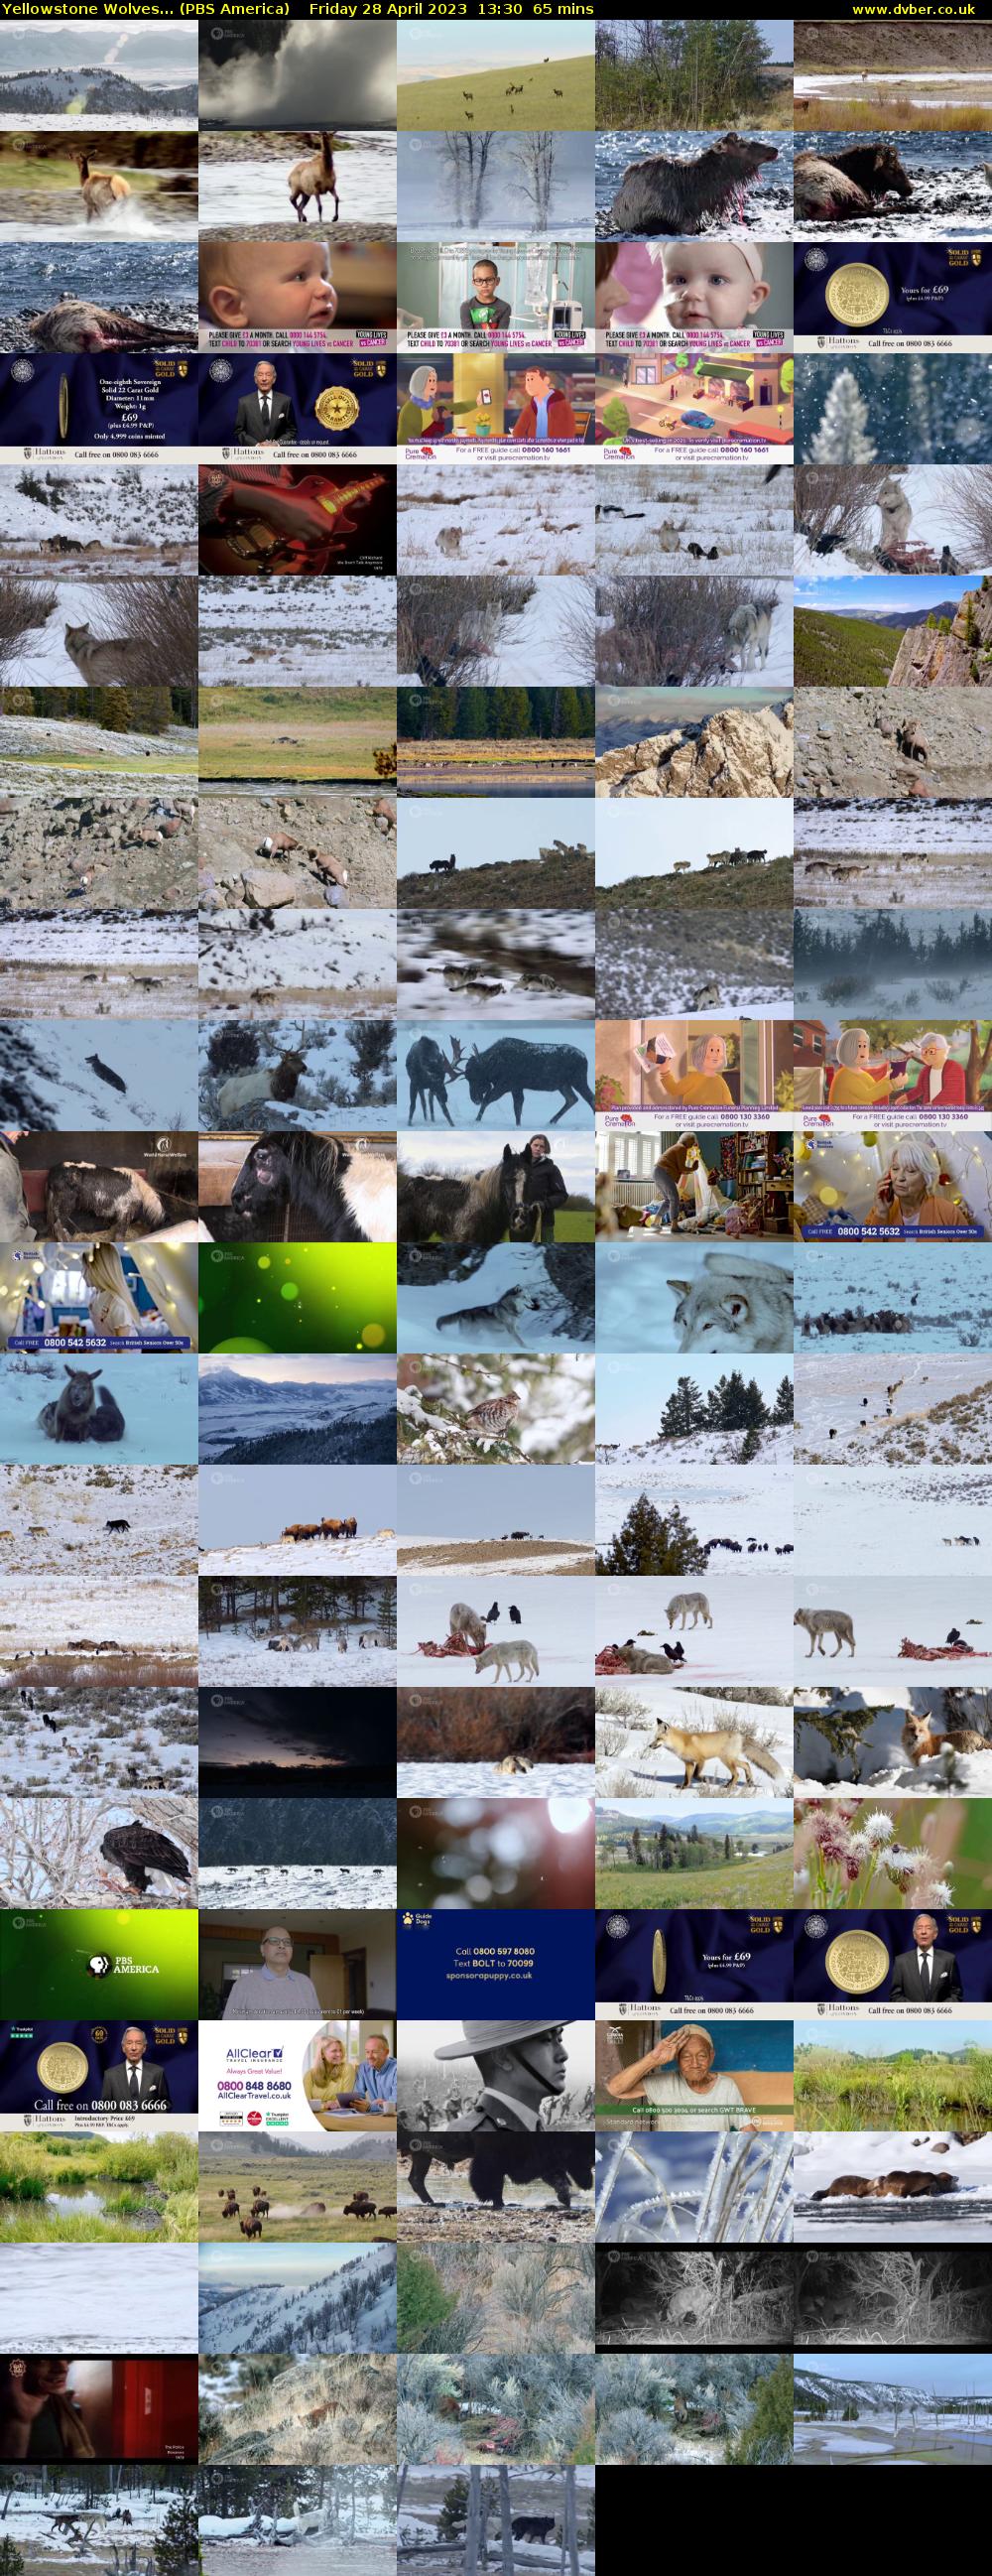 Yellowstone Wolves... (PBS America) Friday 28 April 2023 13:30 - 14:35